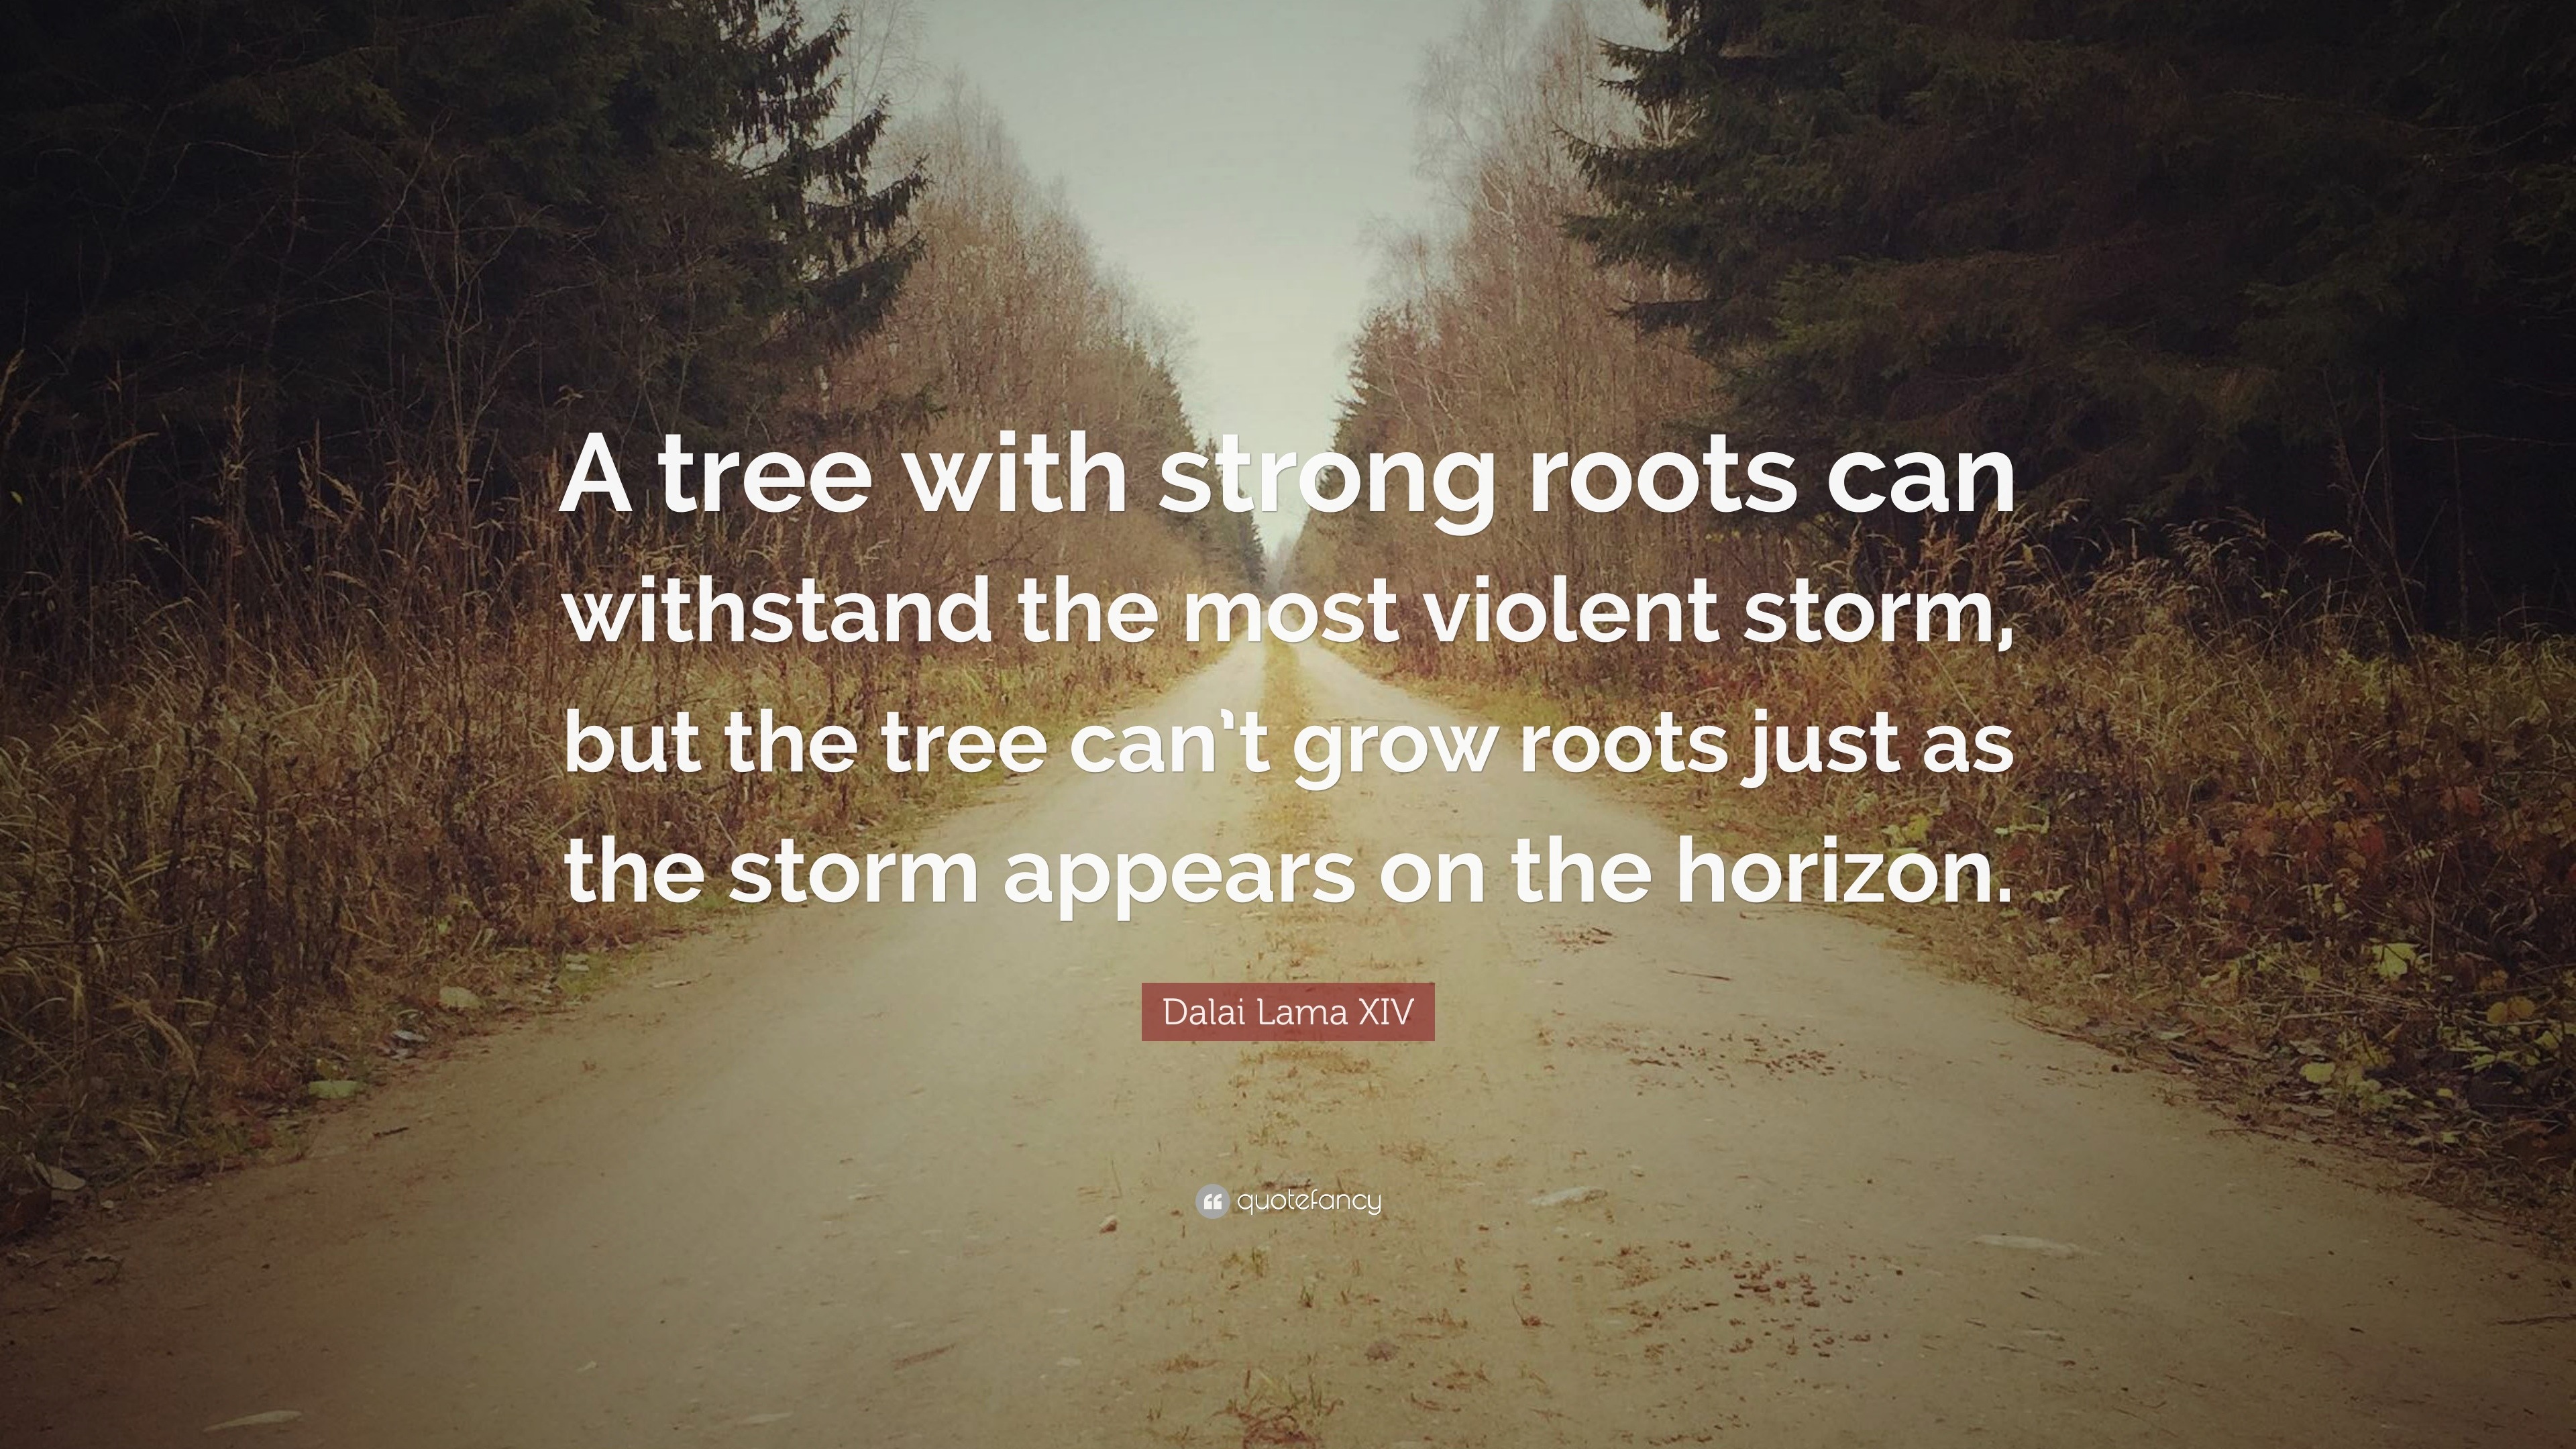 Dalai Lama XIV Quote “A tree with strong roots can